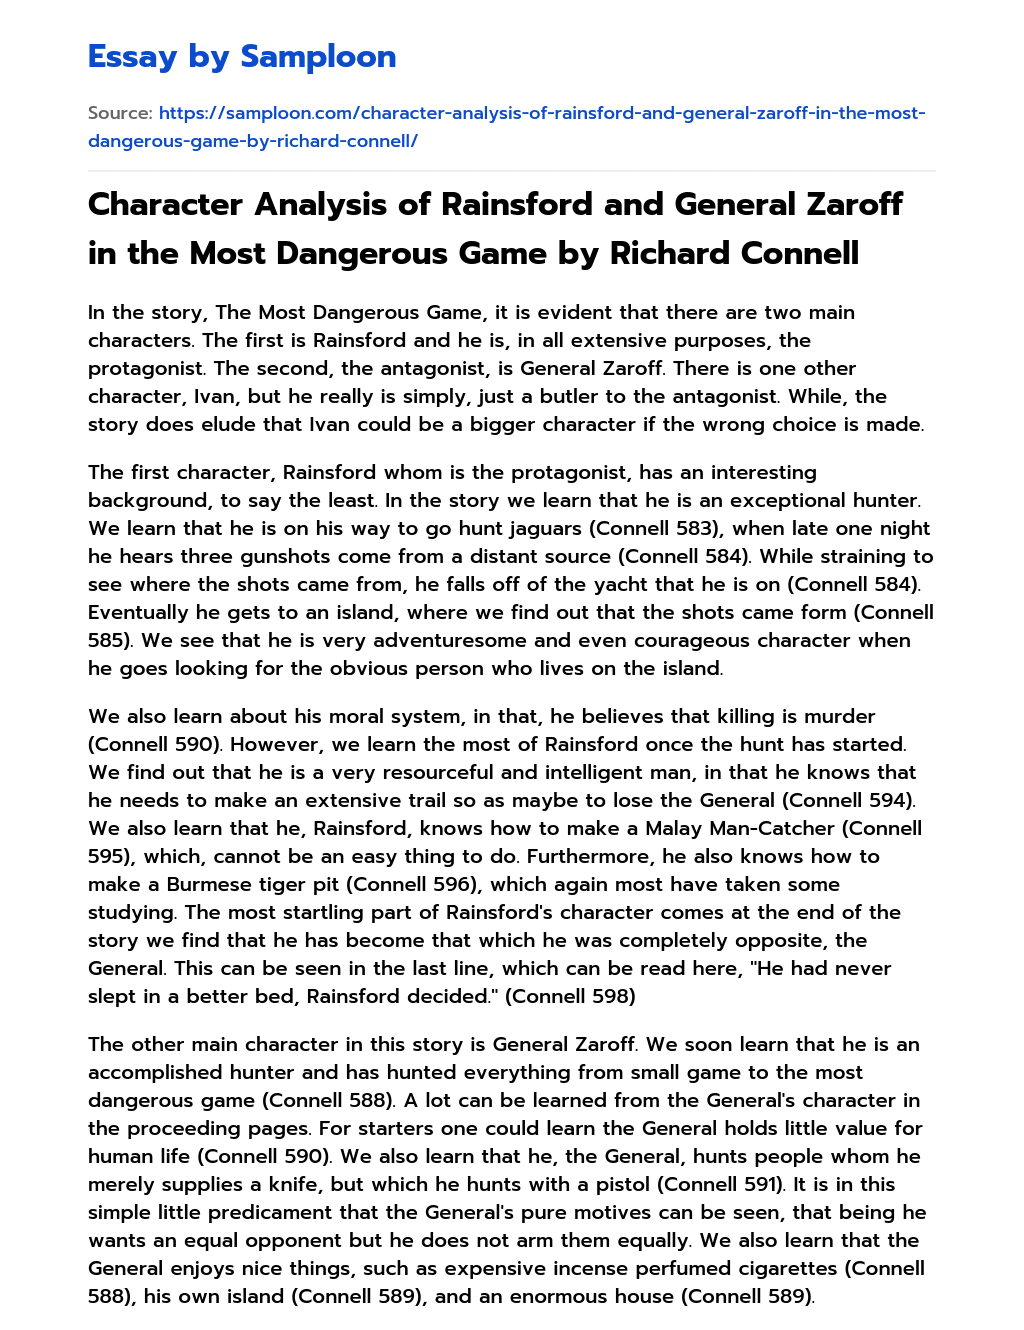 Character Analysis of Rainsford and General Zaroff in the Most Dangerous Game by Richard Connell essay